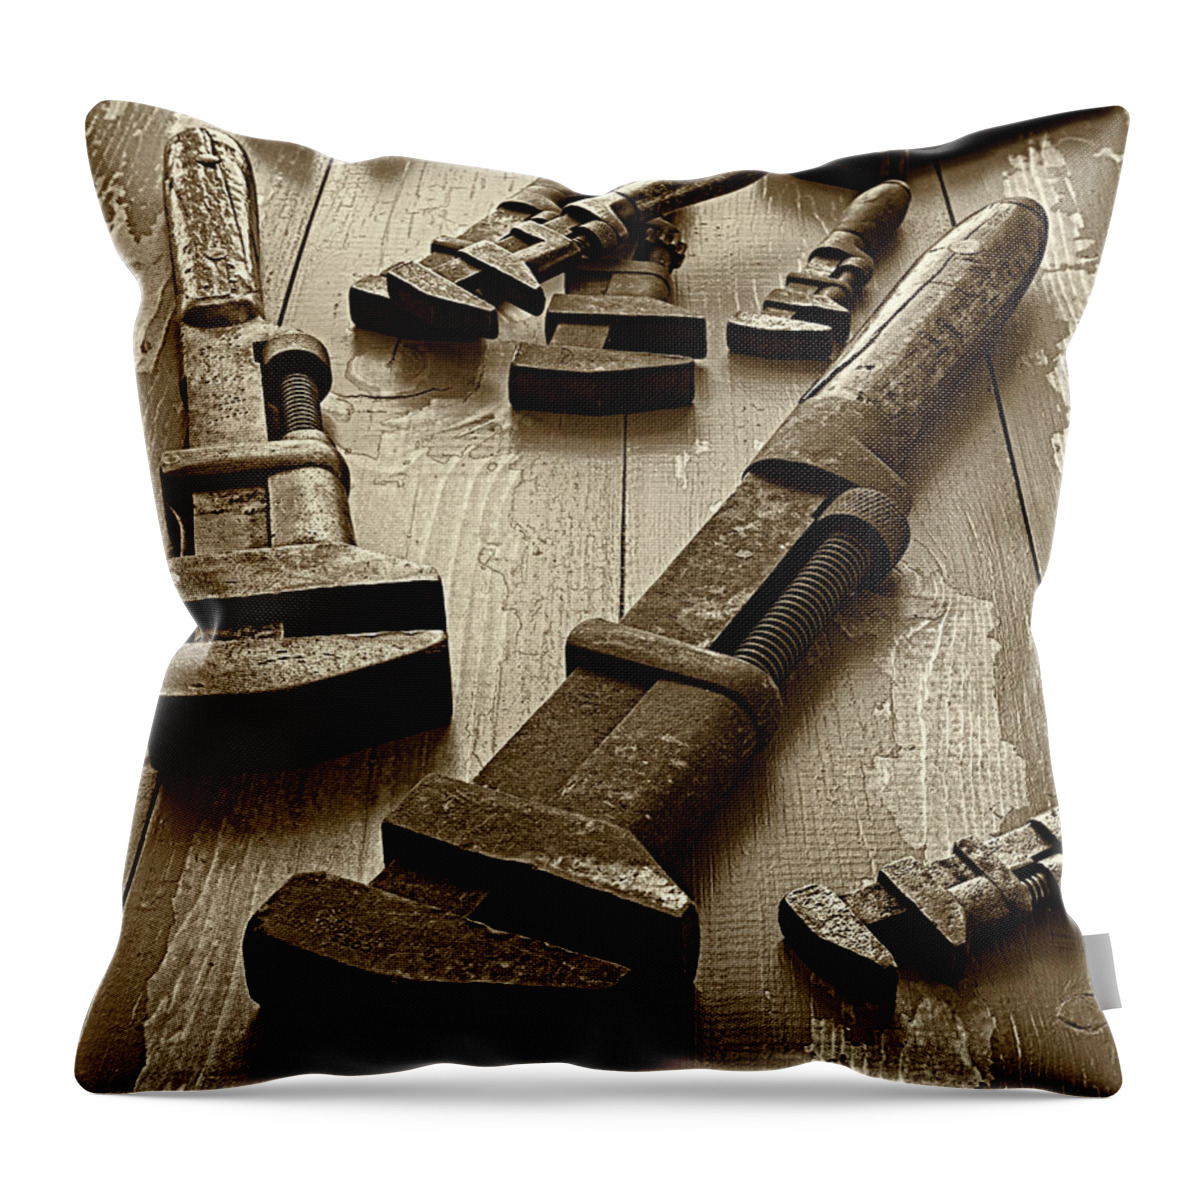 Vintage Throw Pillow featuring the photograph Antique Adjustable Wrenches by David Smith